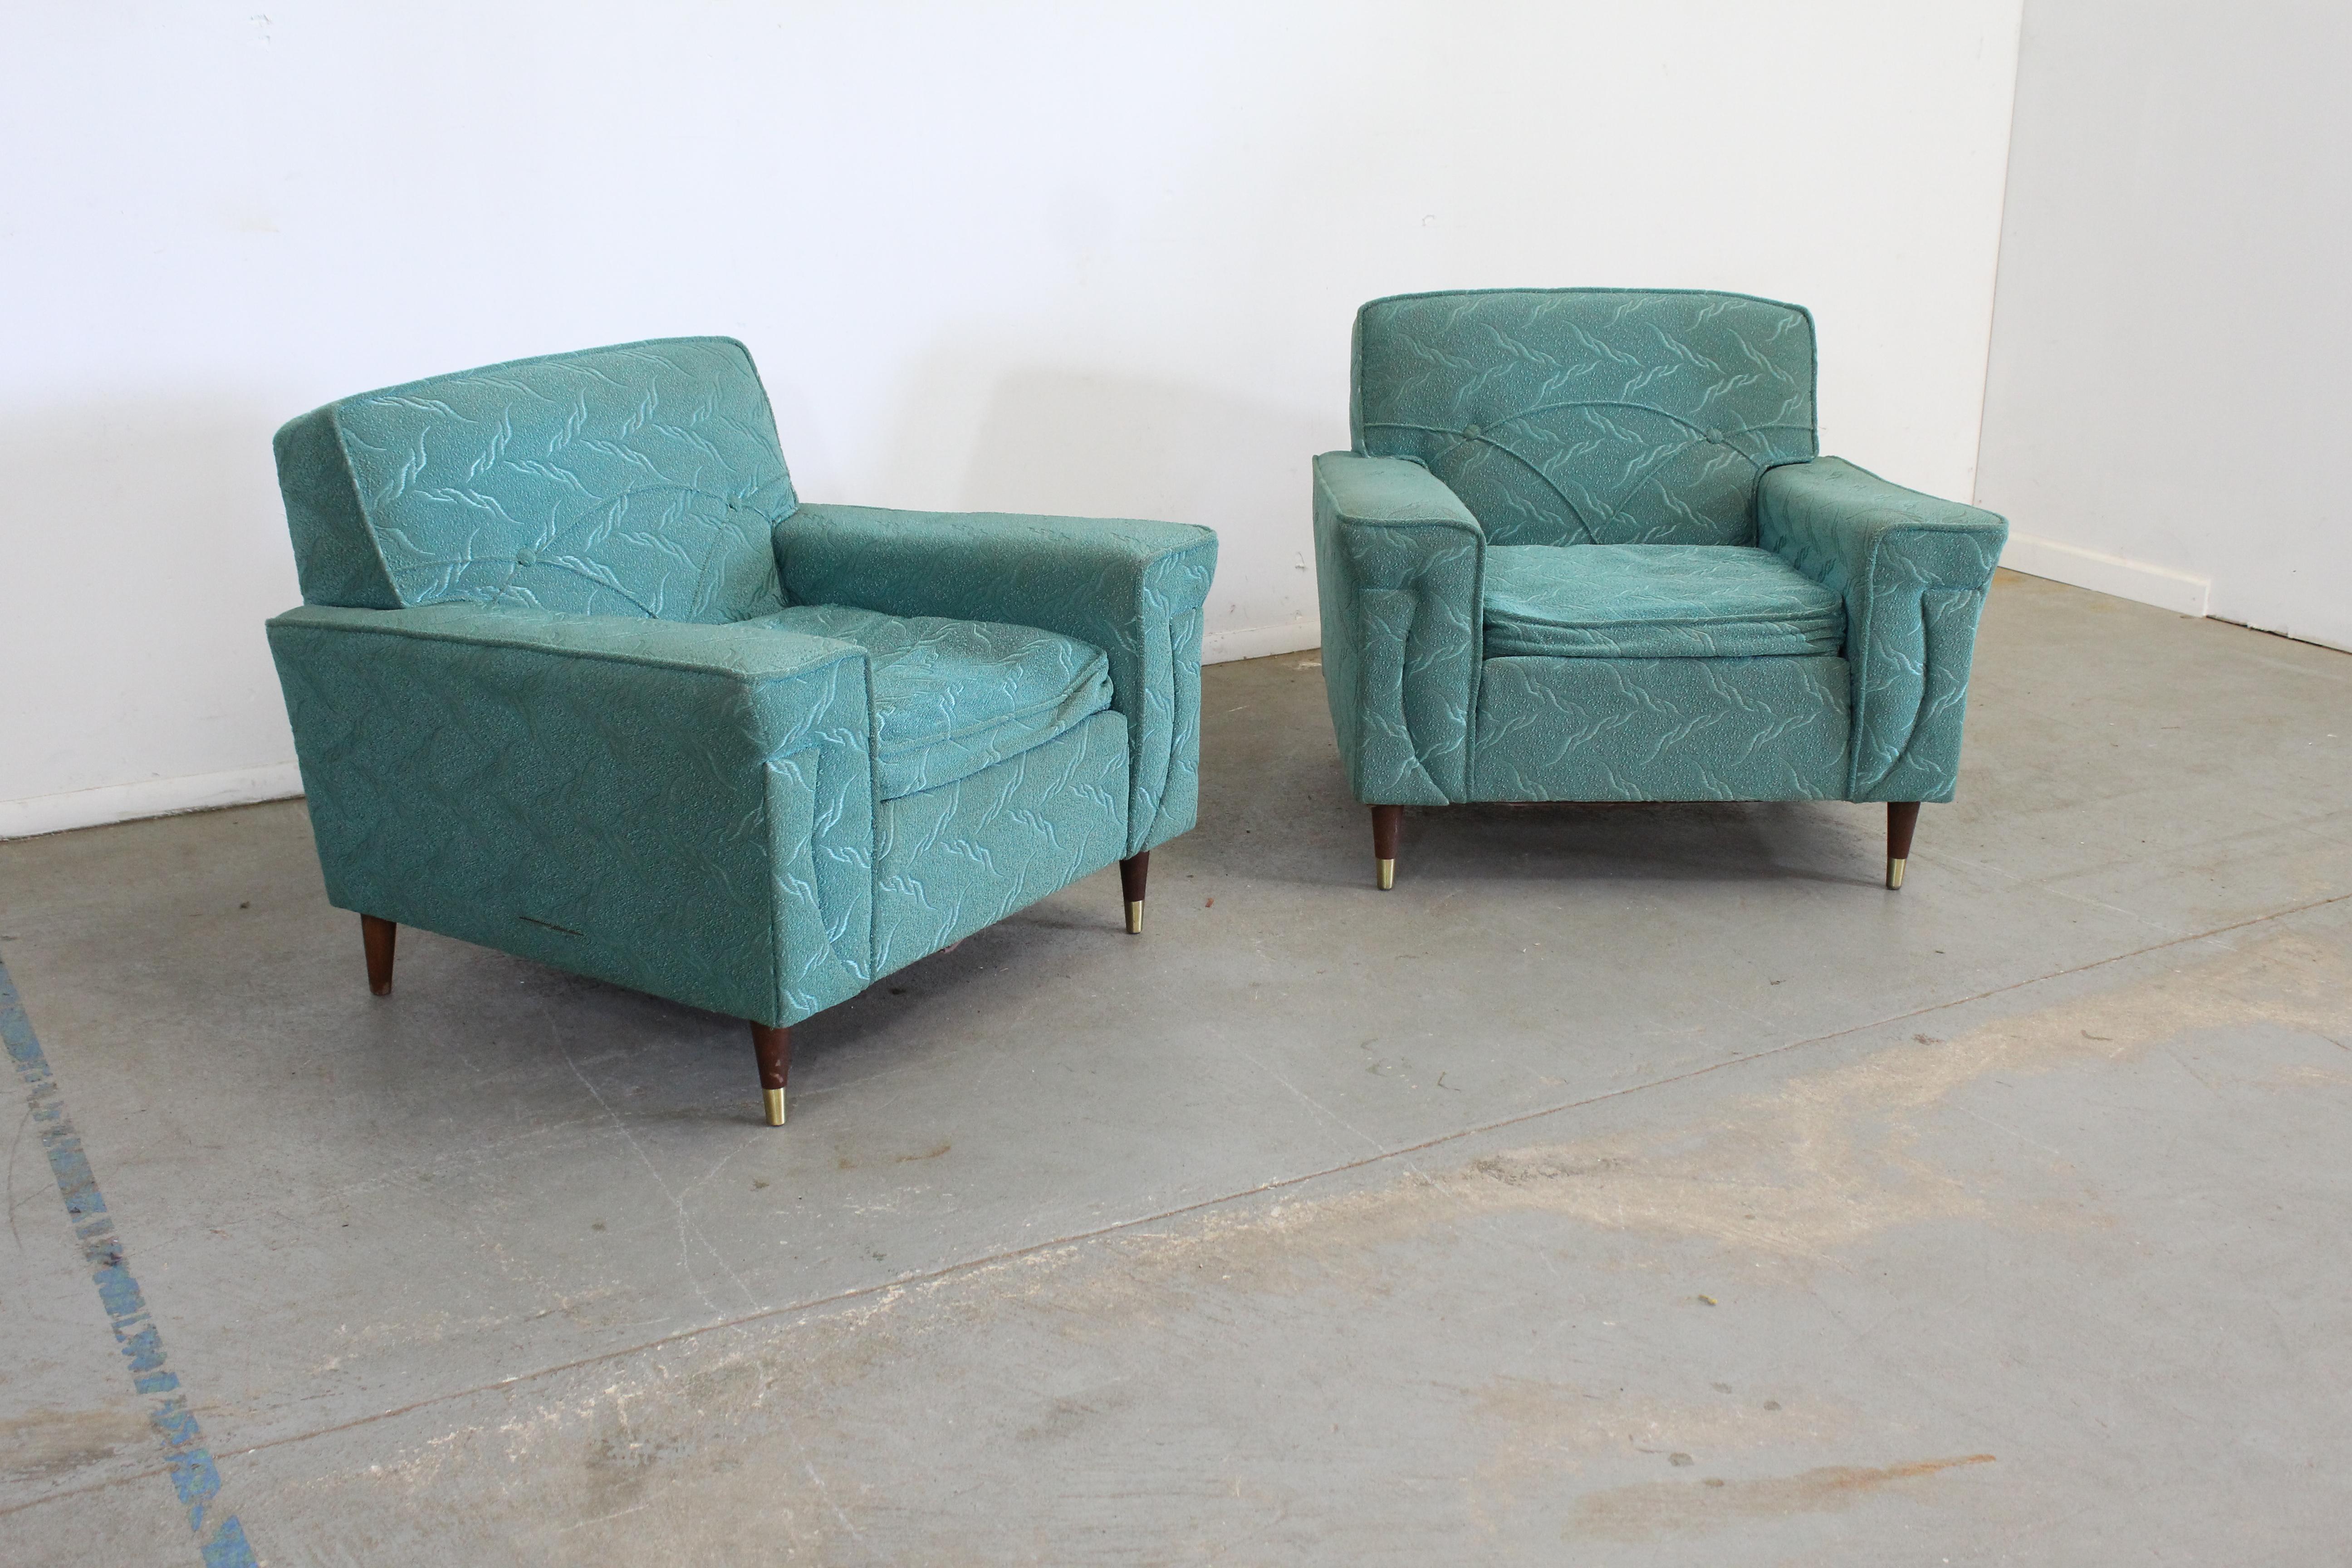 Pair of ball and claw fireside wingback chairs by Thomasville

Offered is a pair of Mid-Century Modern Atomic teal club chairs. The chairs have a great look with nice lines, design, and look. The chairs are in good condition, but need new